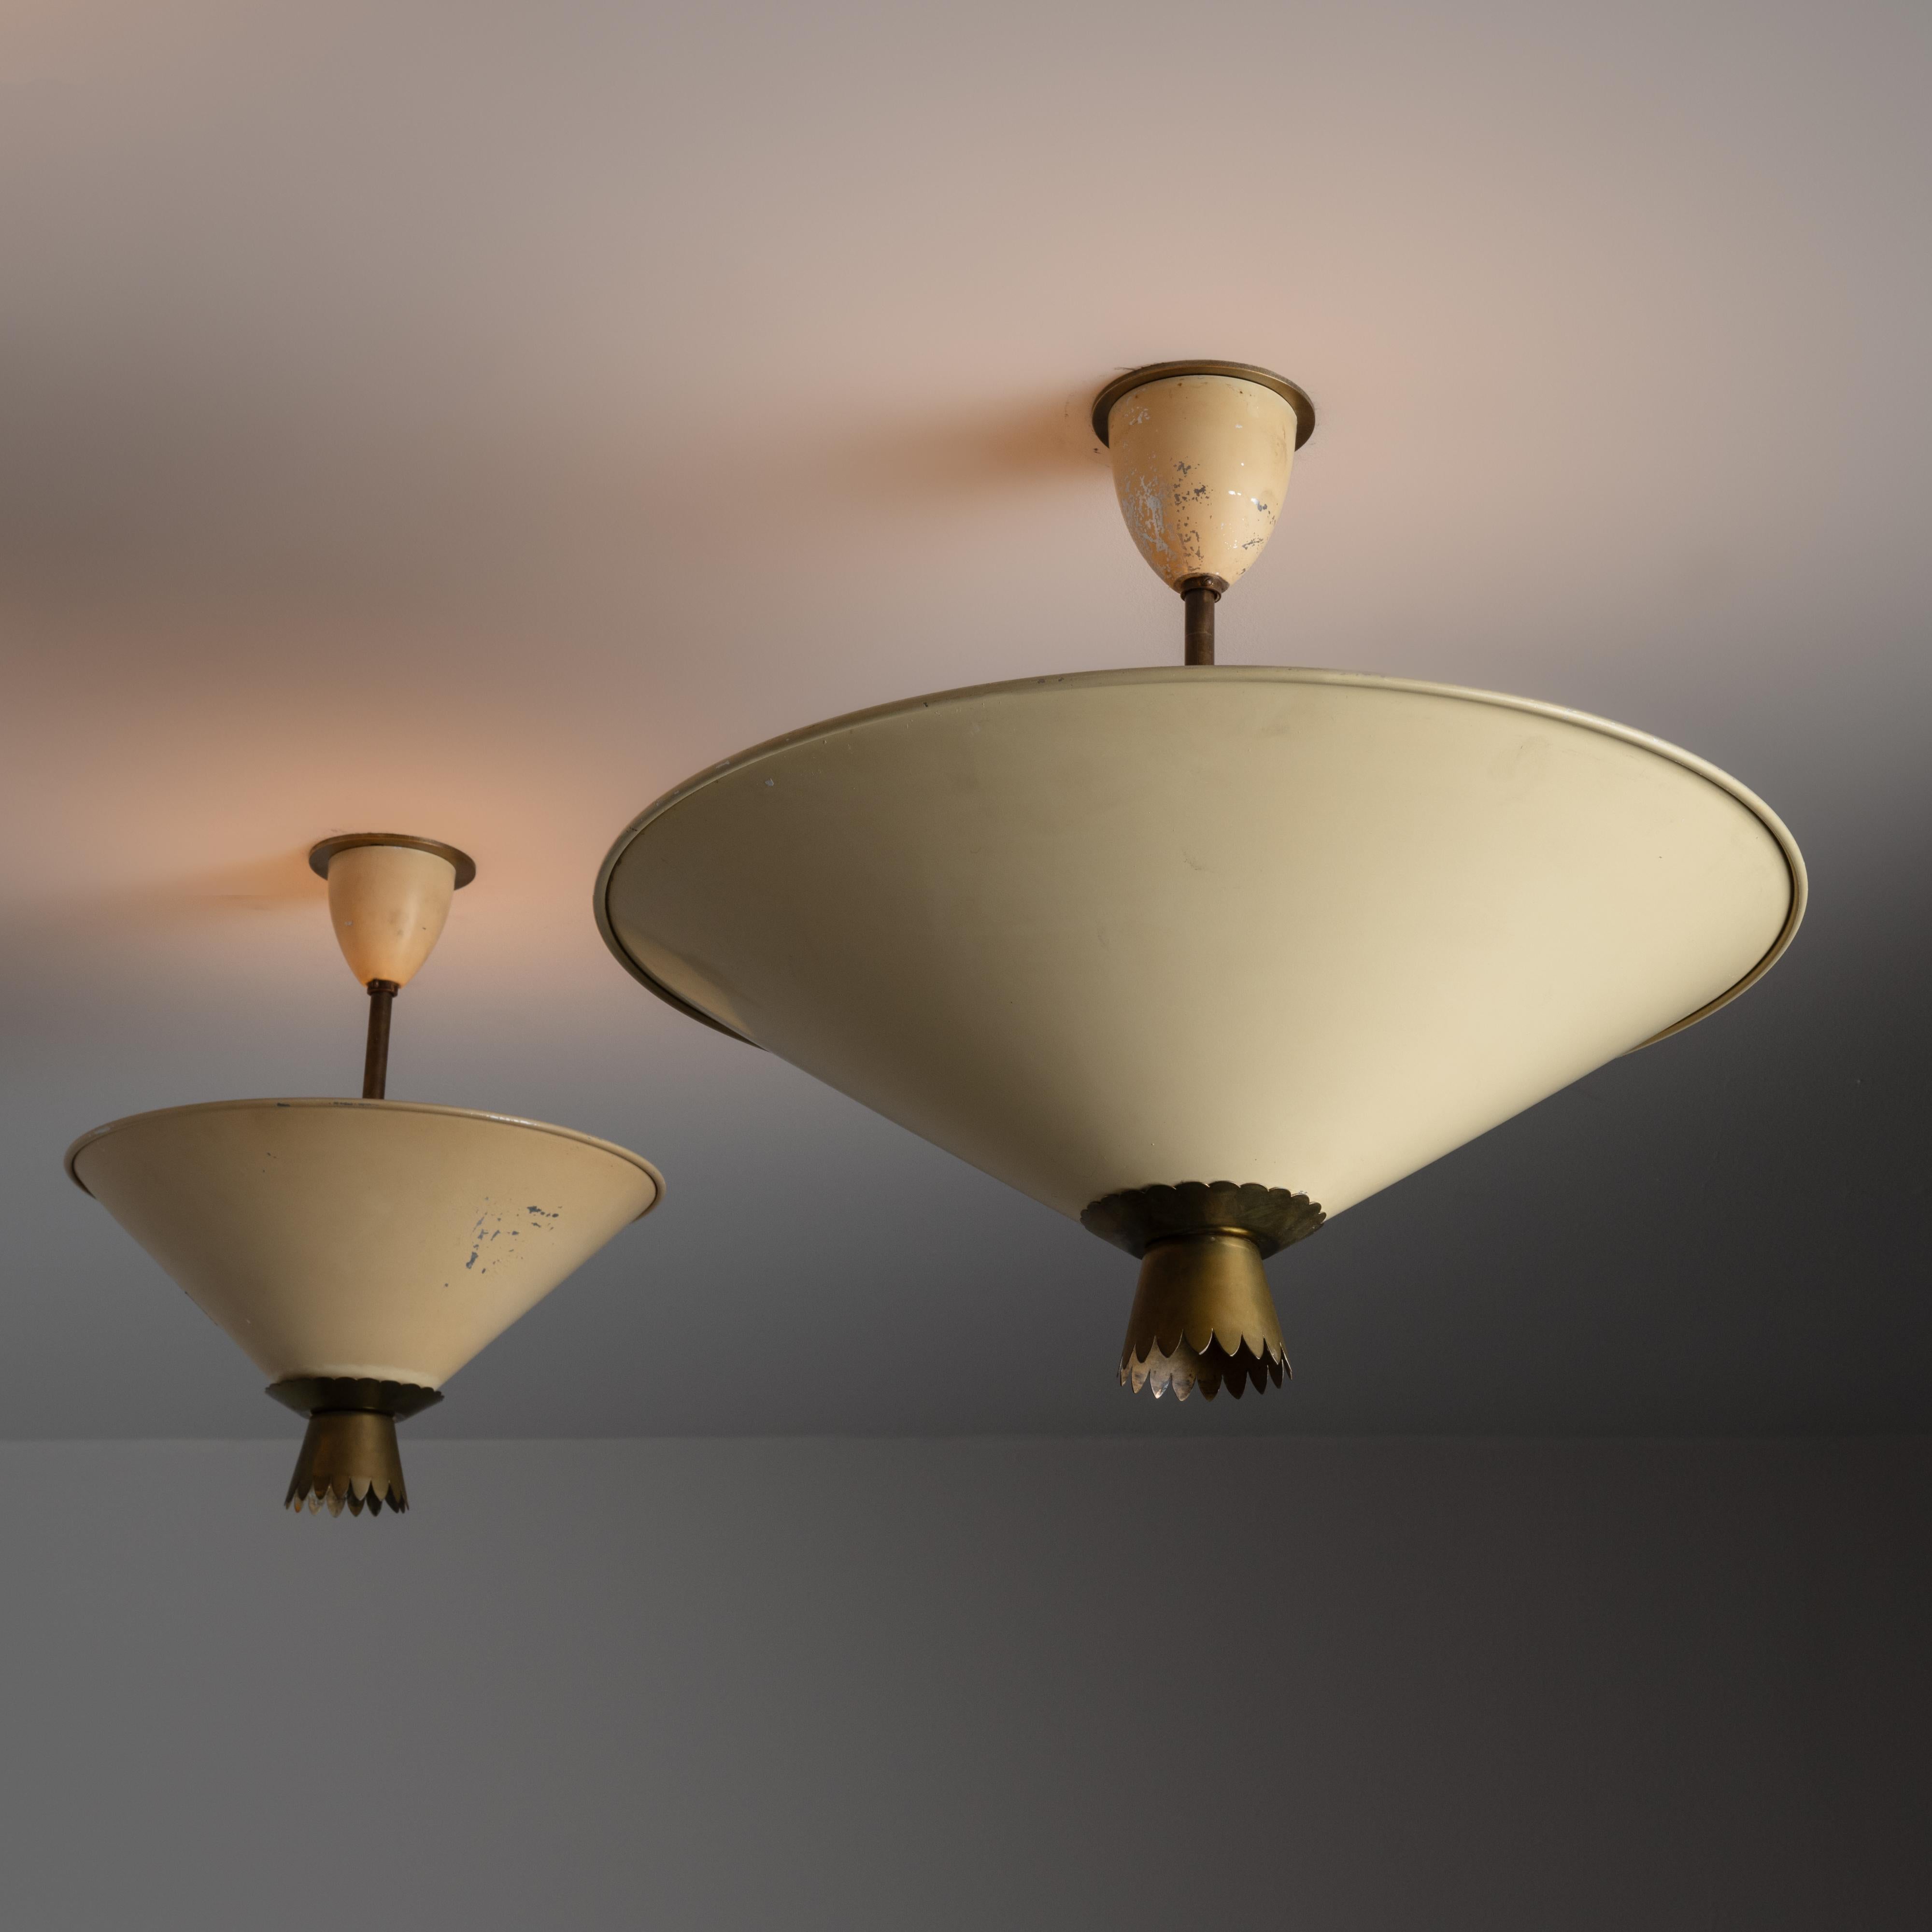 Flush Mounts by Stilux. Designed and manufactured in Italy, circa the 1950s. Cream colored shades with aged brass bottom scalloped accent. Each fixture holds a tri-socket, adapted for the US. We recommend 40w max bulbs. Bulbs not provided. Please